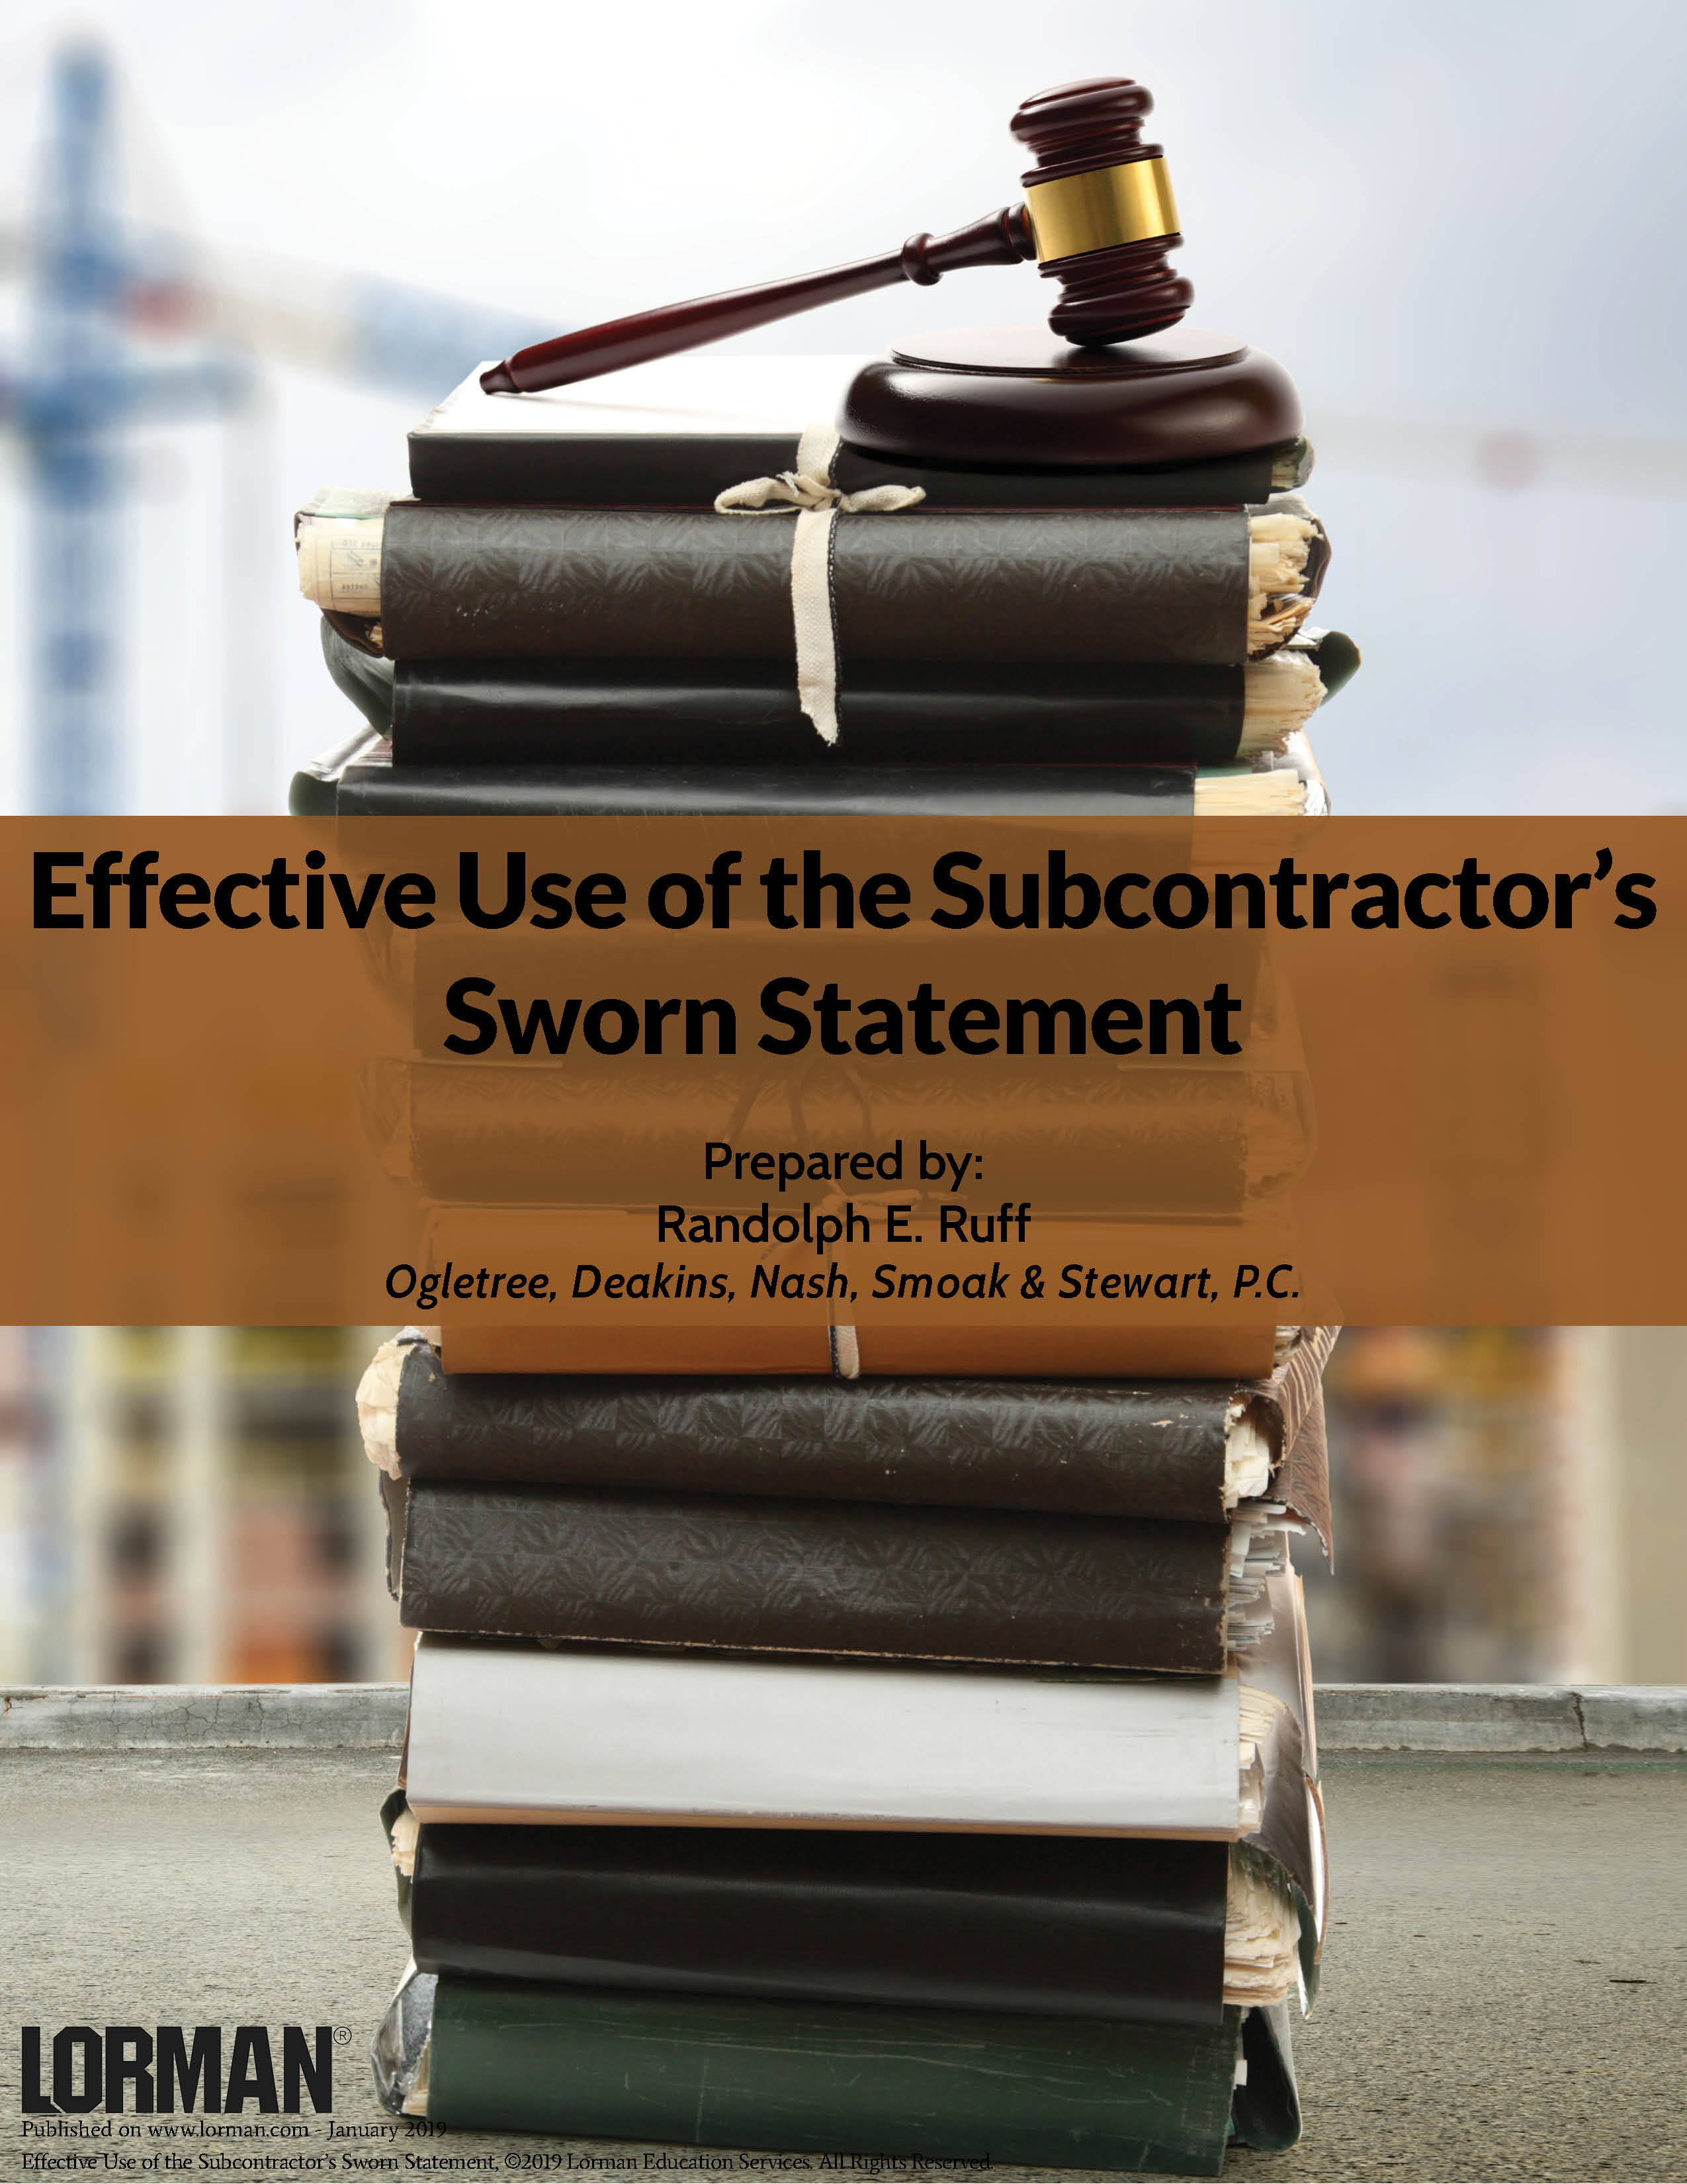 Effective Use of the Subcontractor’s Sworn Statement